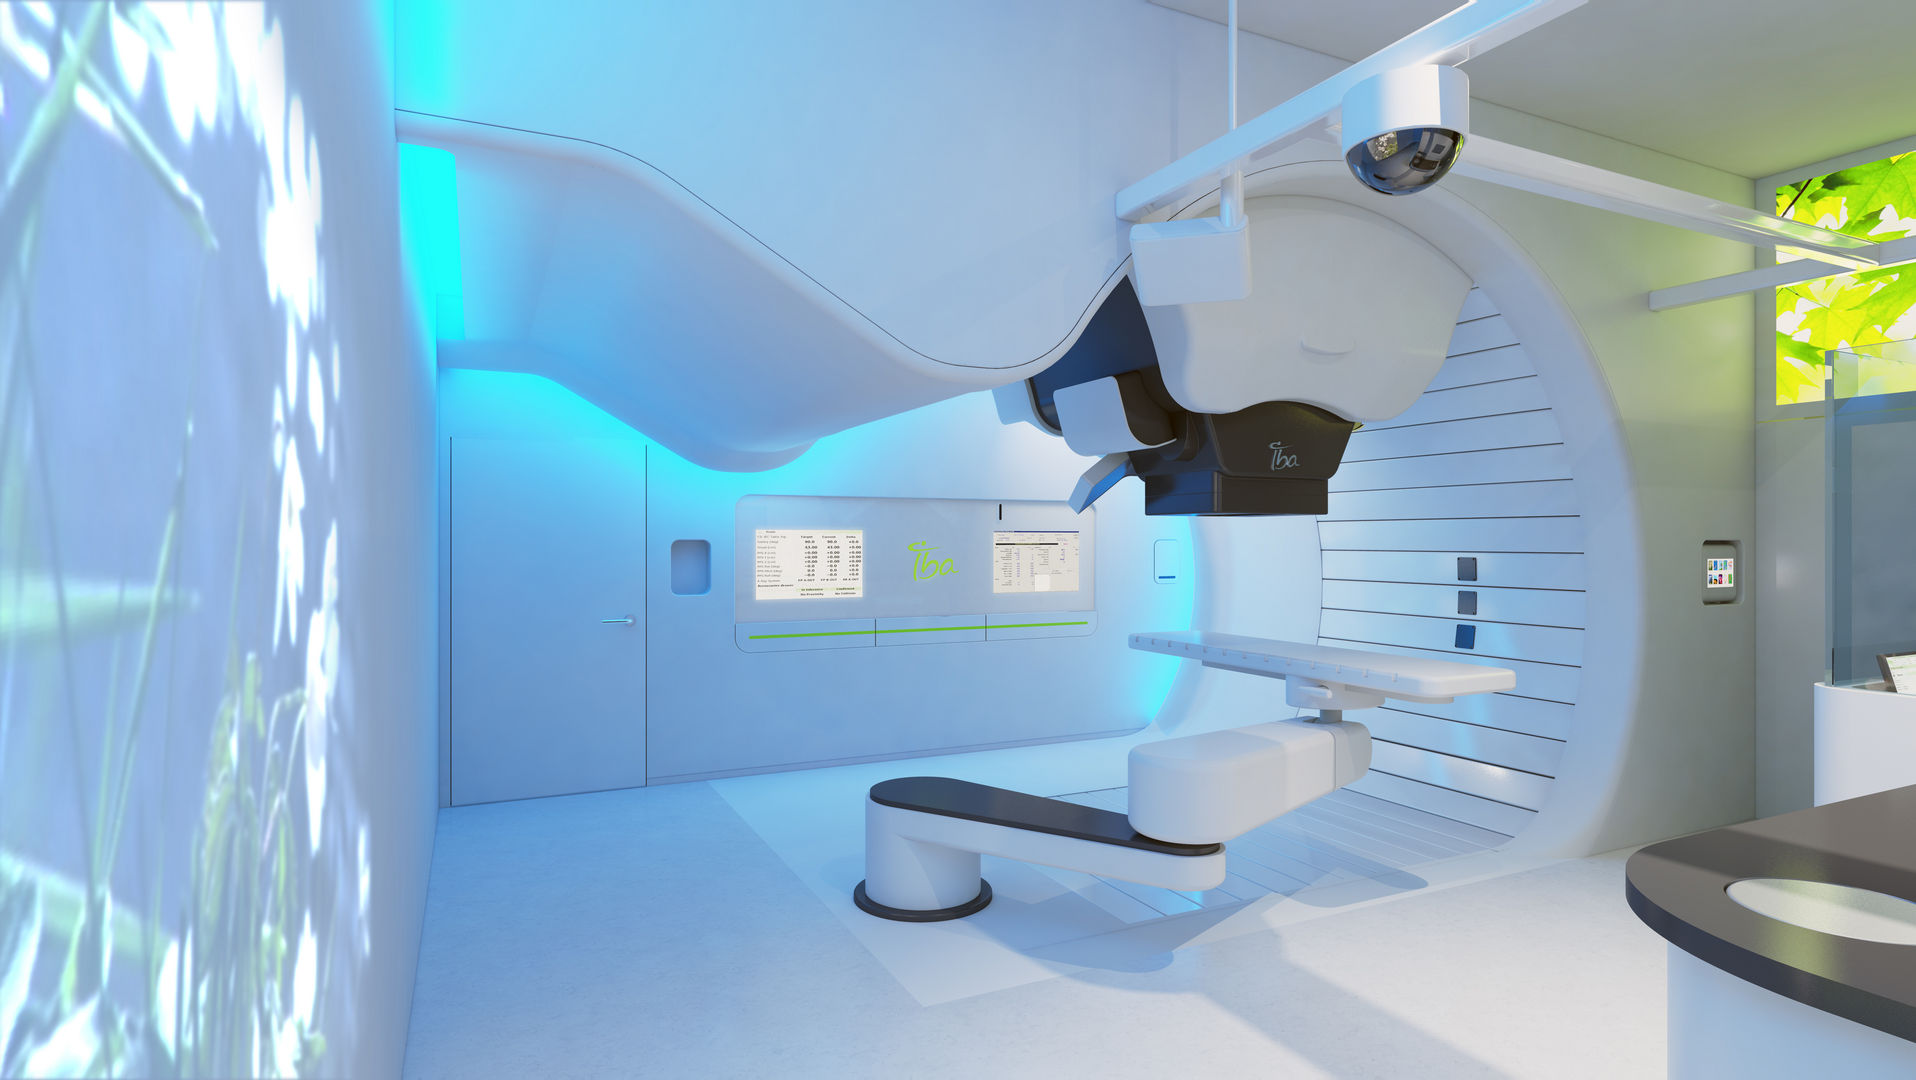 Ambient Experience - IBA Proton Therapy Suite (Willis Knighton)